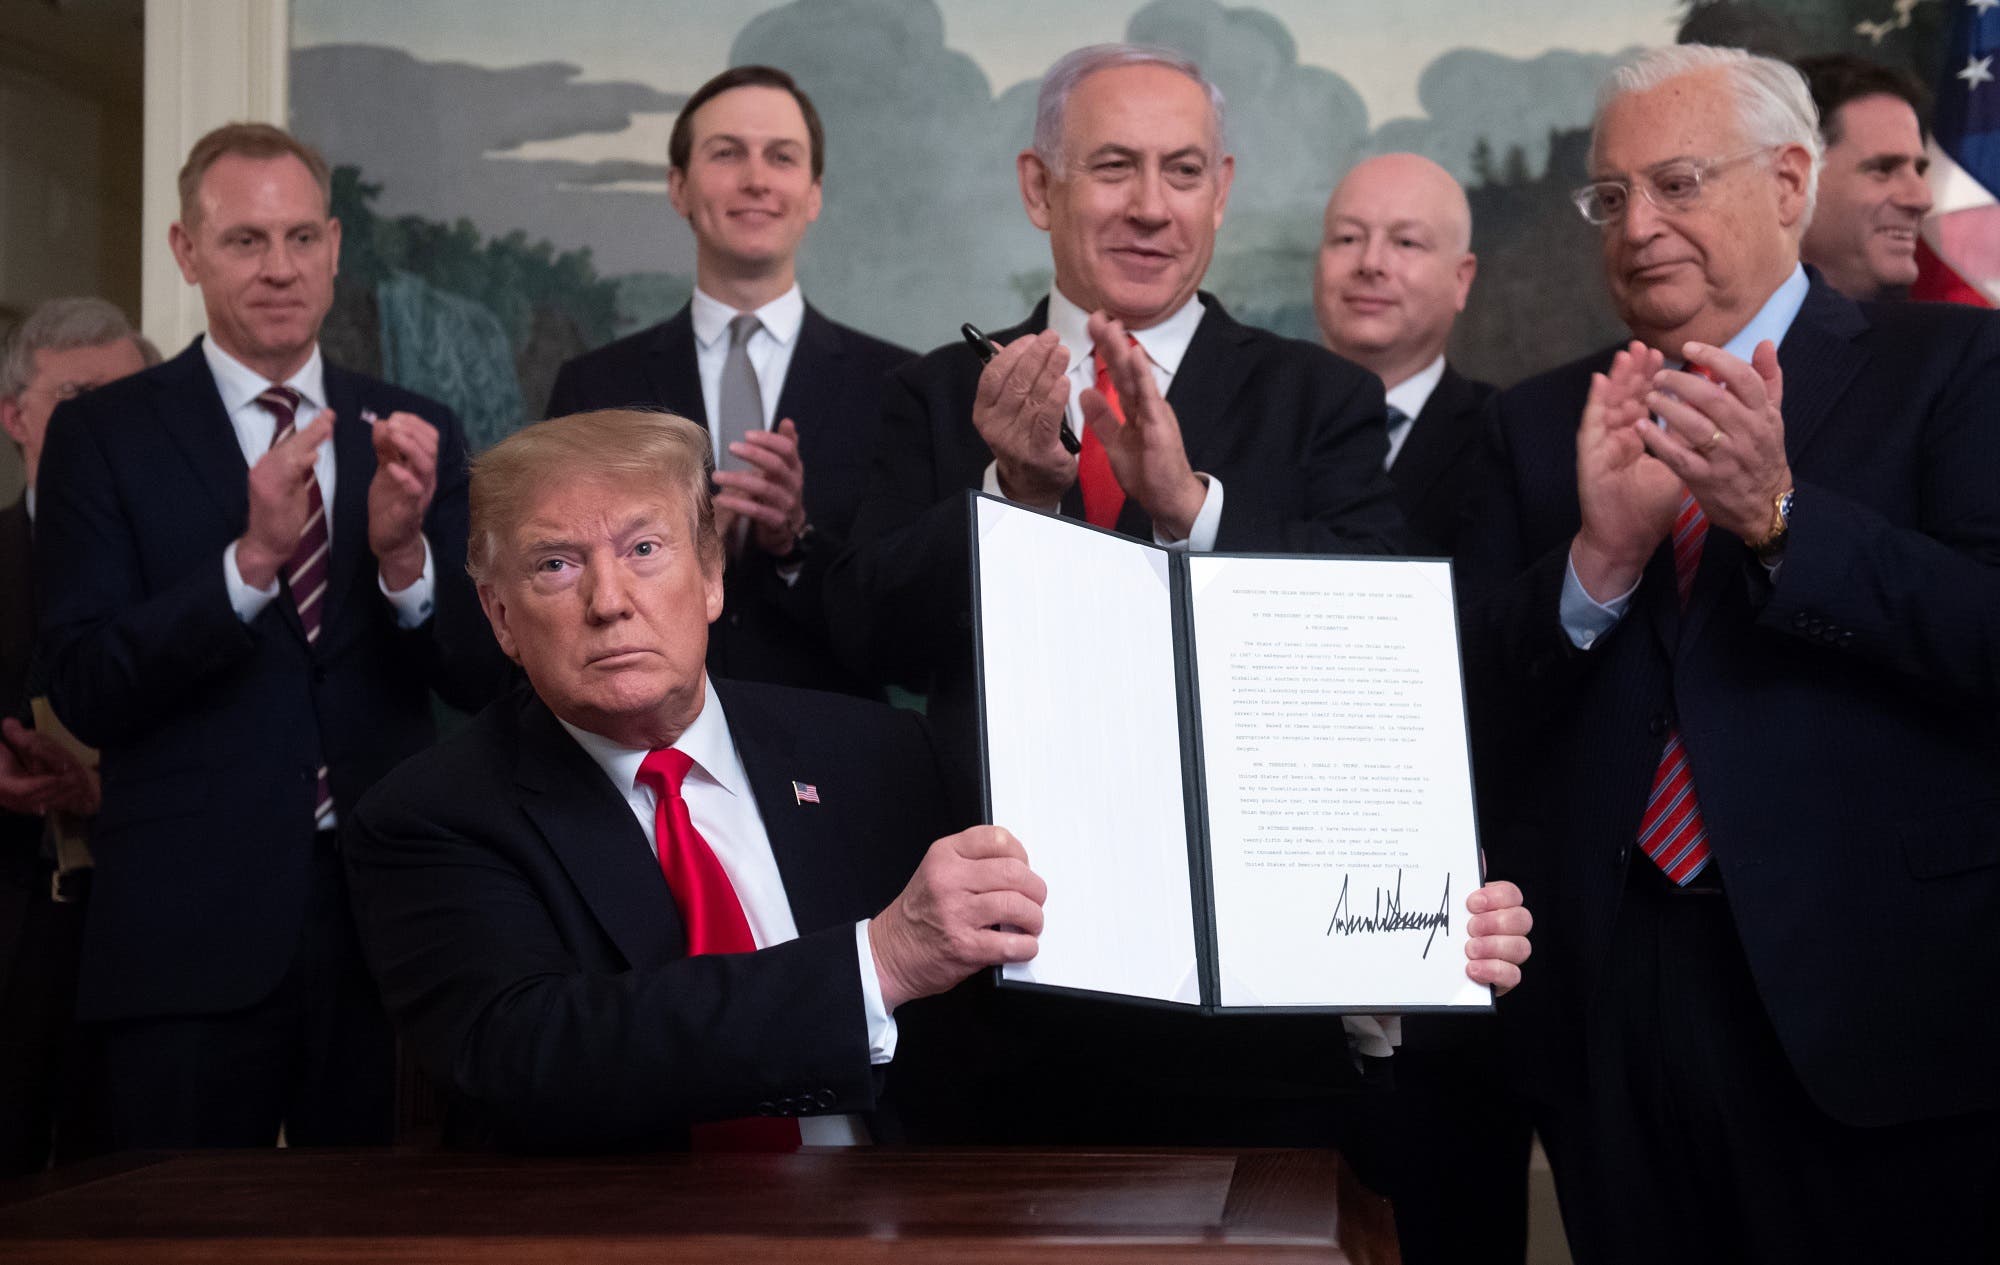 A file photo shows former president Trump holds up a signed Proclamation on the Golan Heights alongside Israeli PM Netanyahu in Washington, DC on March 25, 2019. (AFP)